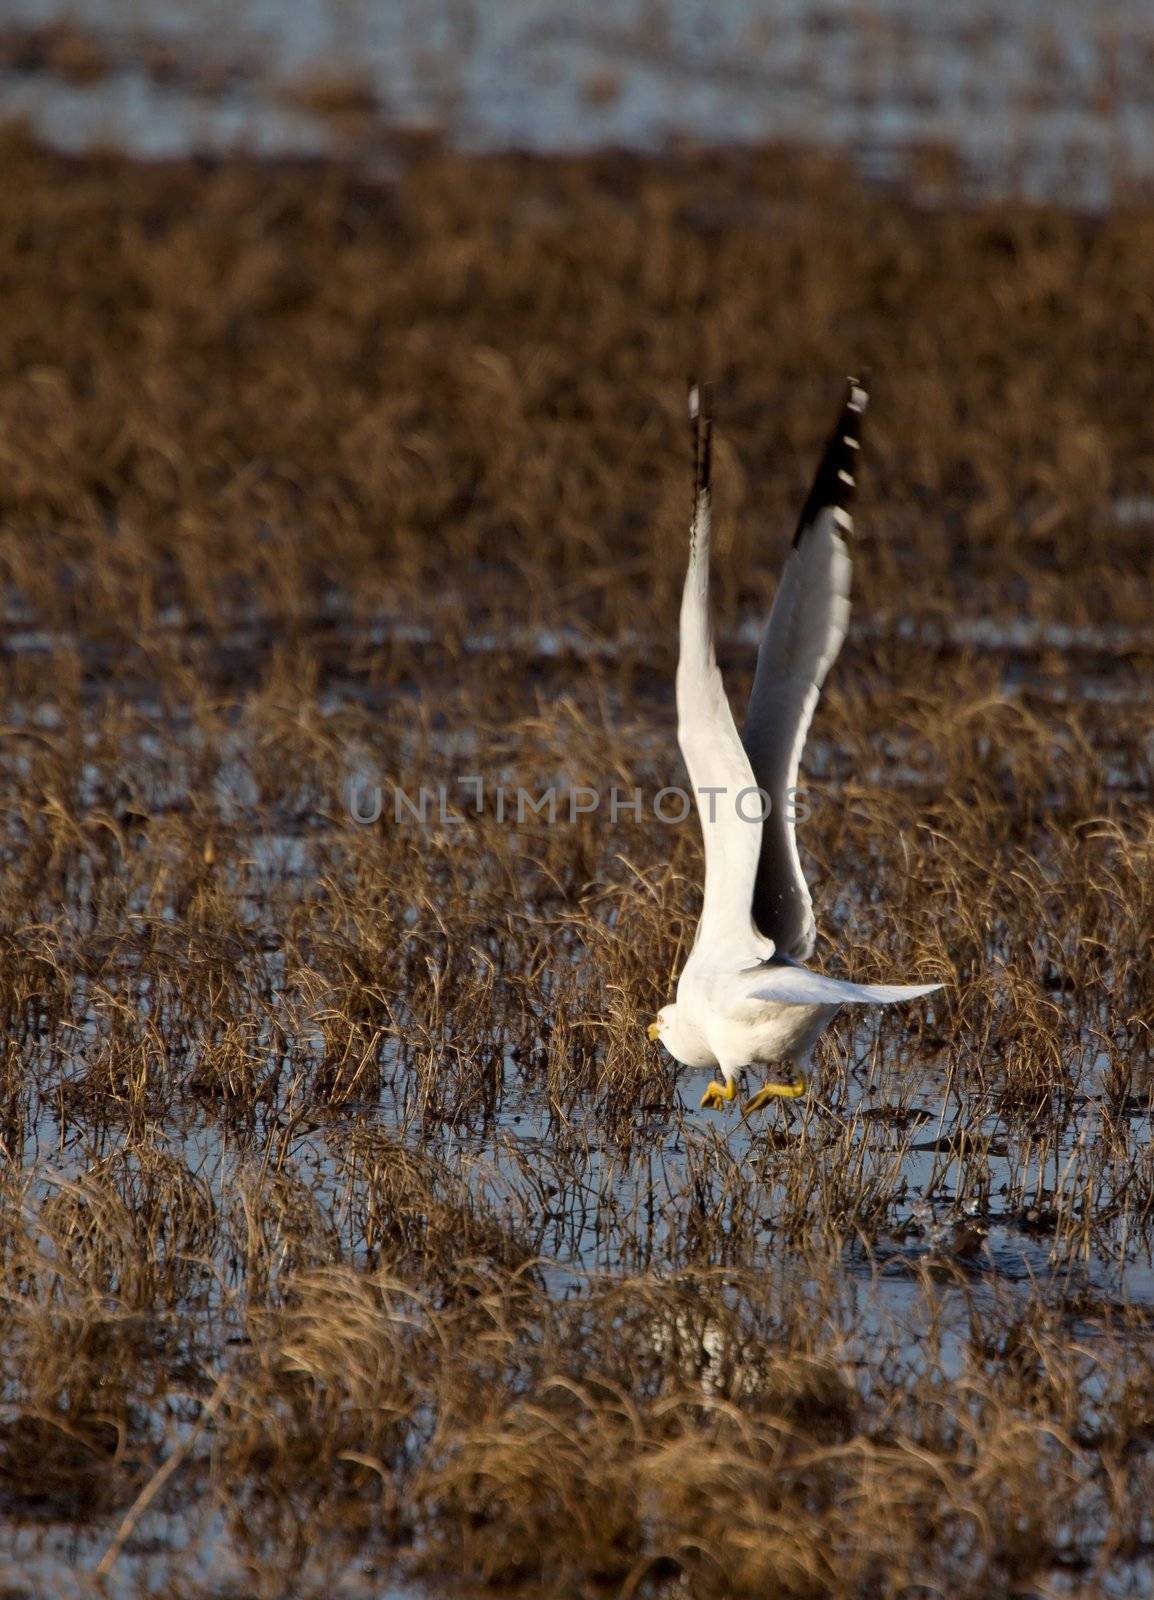 Seagull in flight by pictureguy